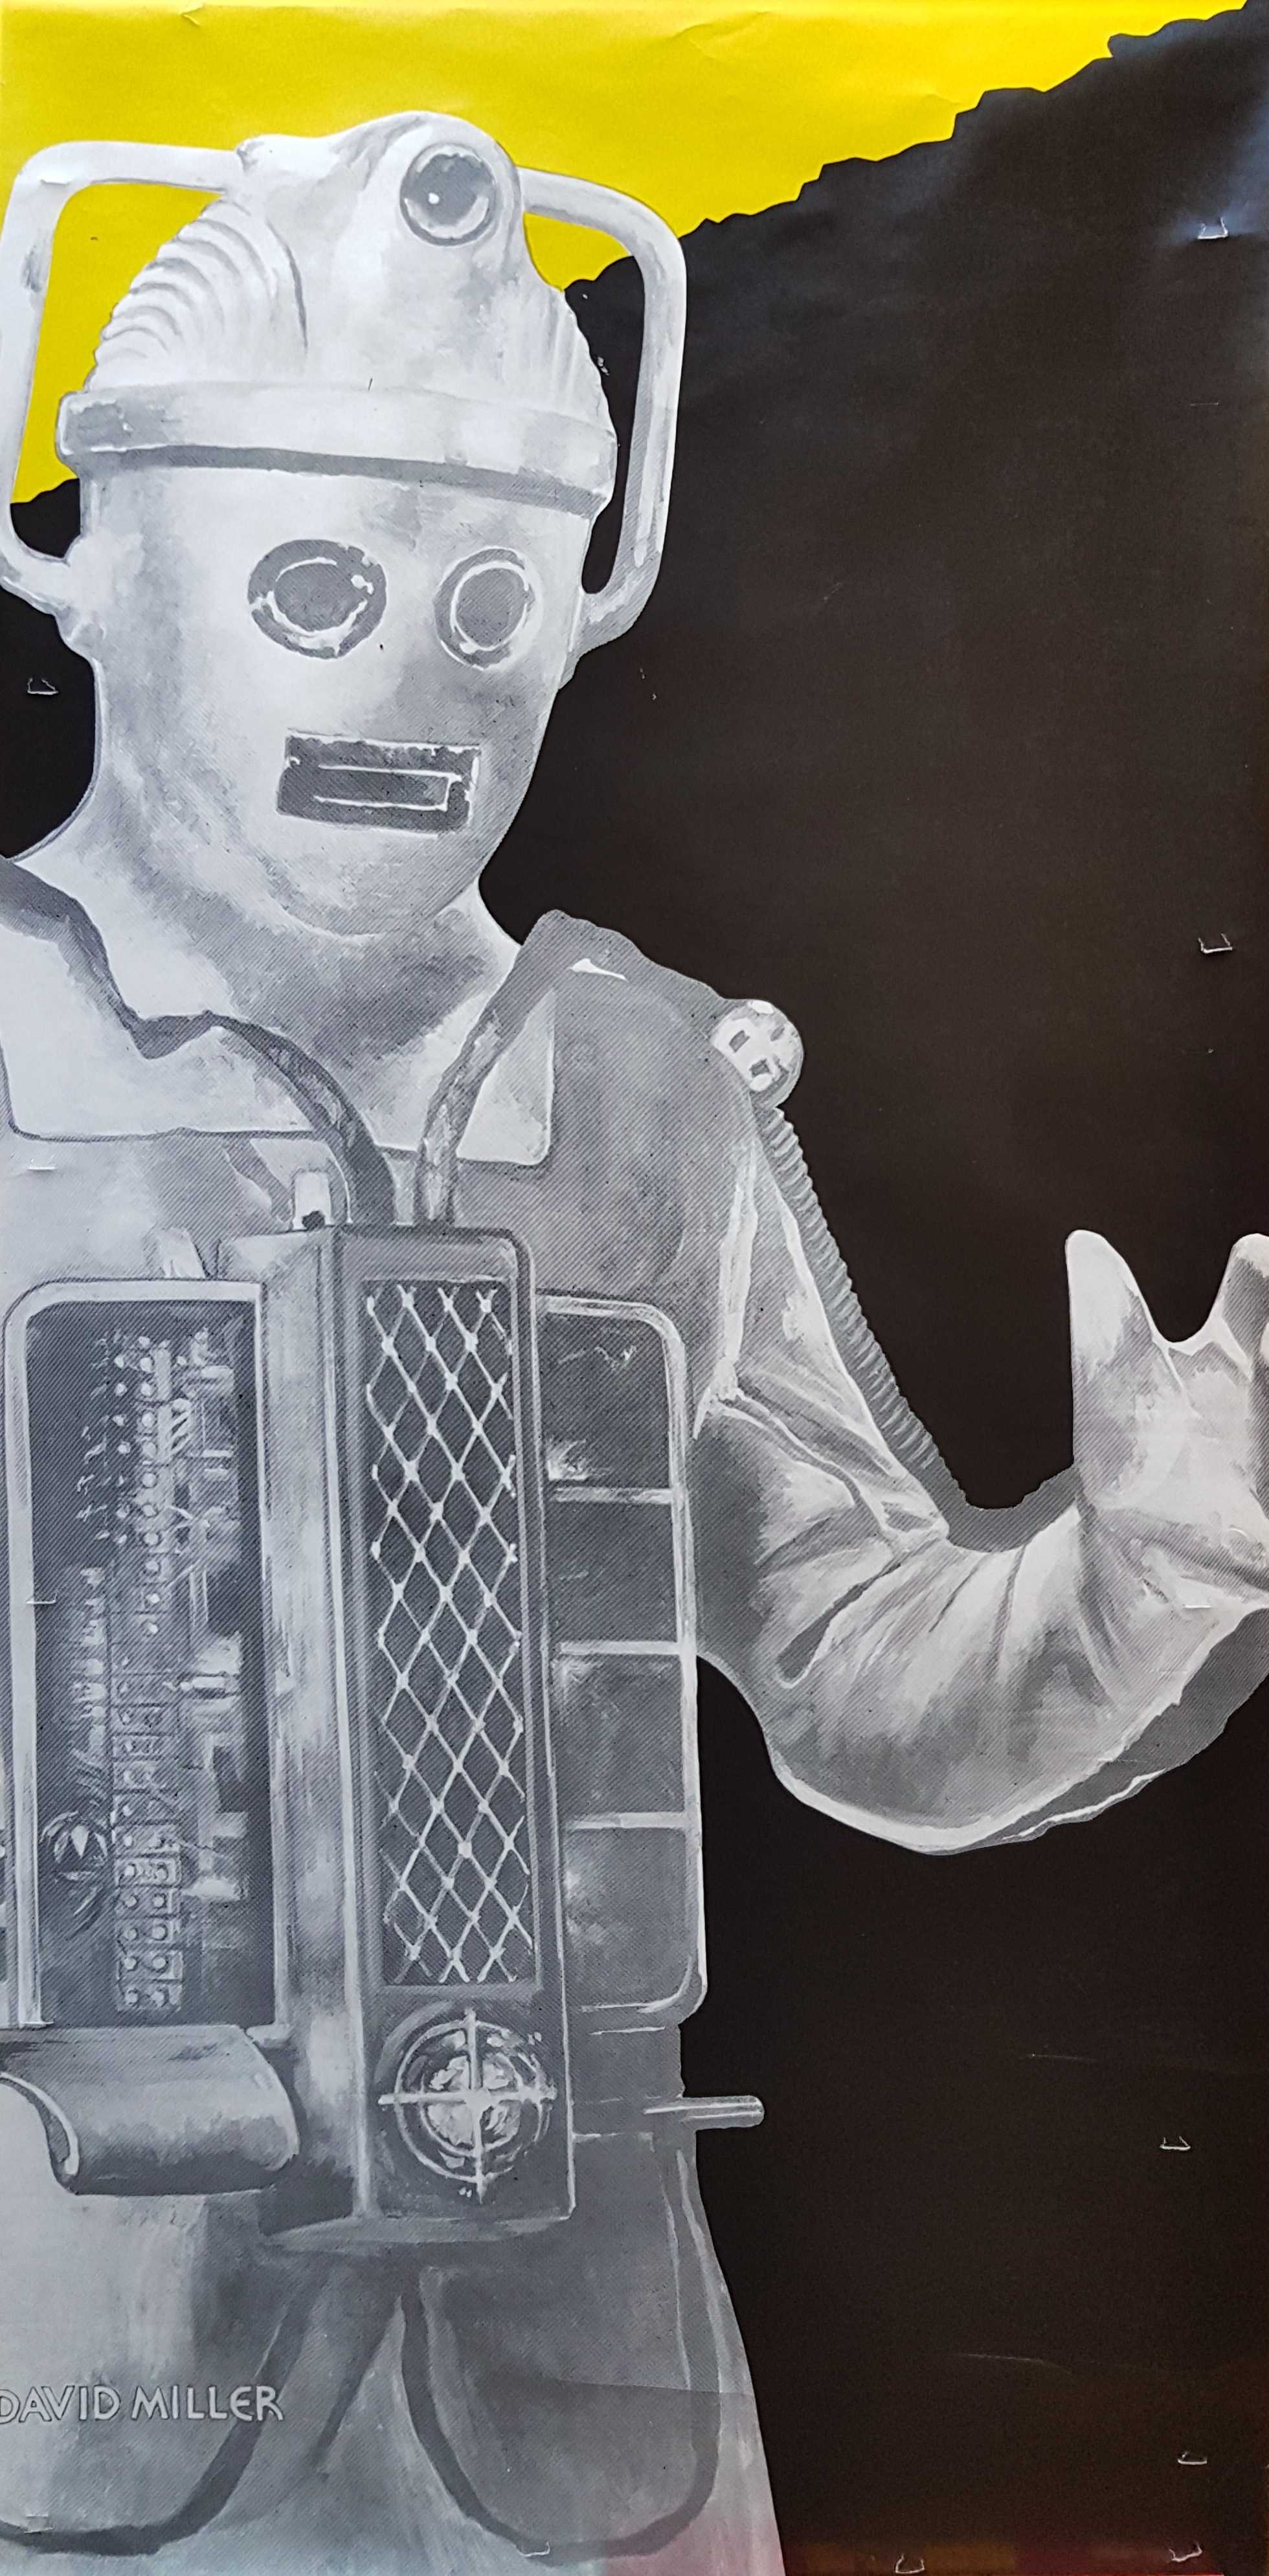 Picture of Doctor Who - Cyberman by artist Unknown from the BBC posters - Records and Tapes library